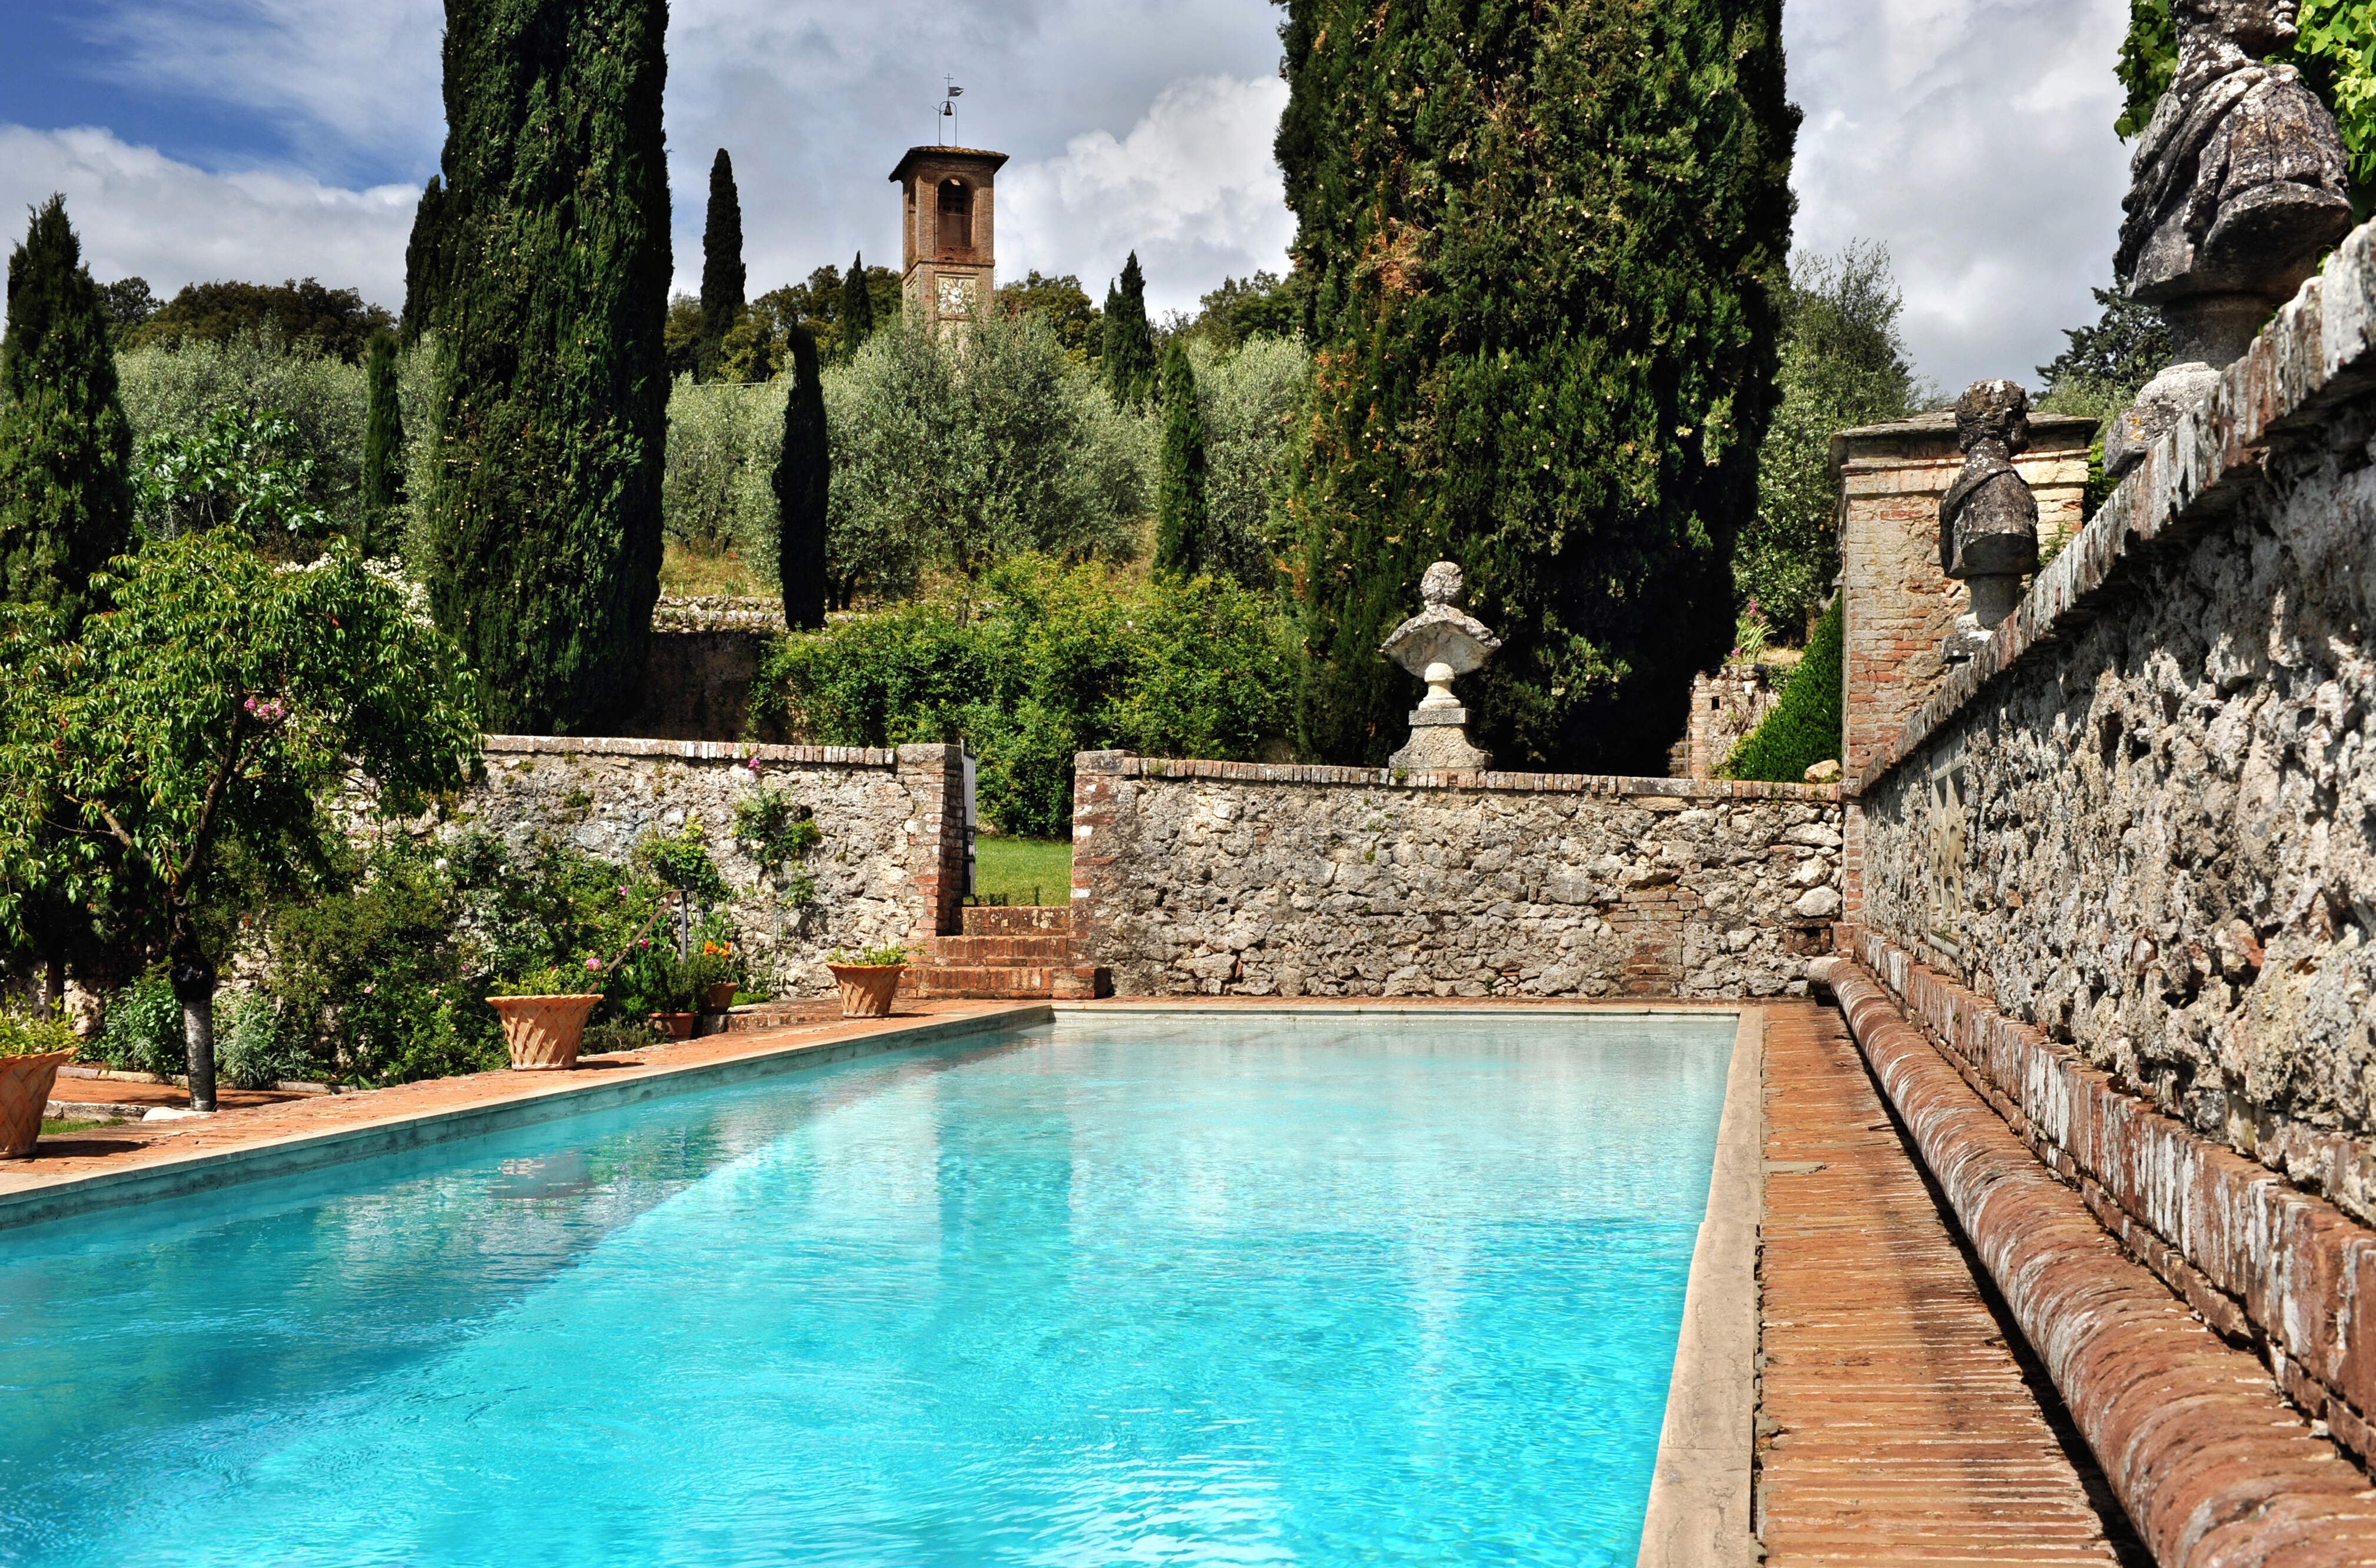  Villa Cetinale  in Province of Siena Le Collectionist